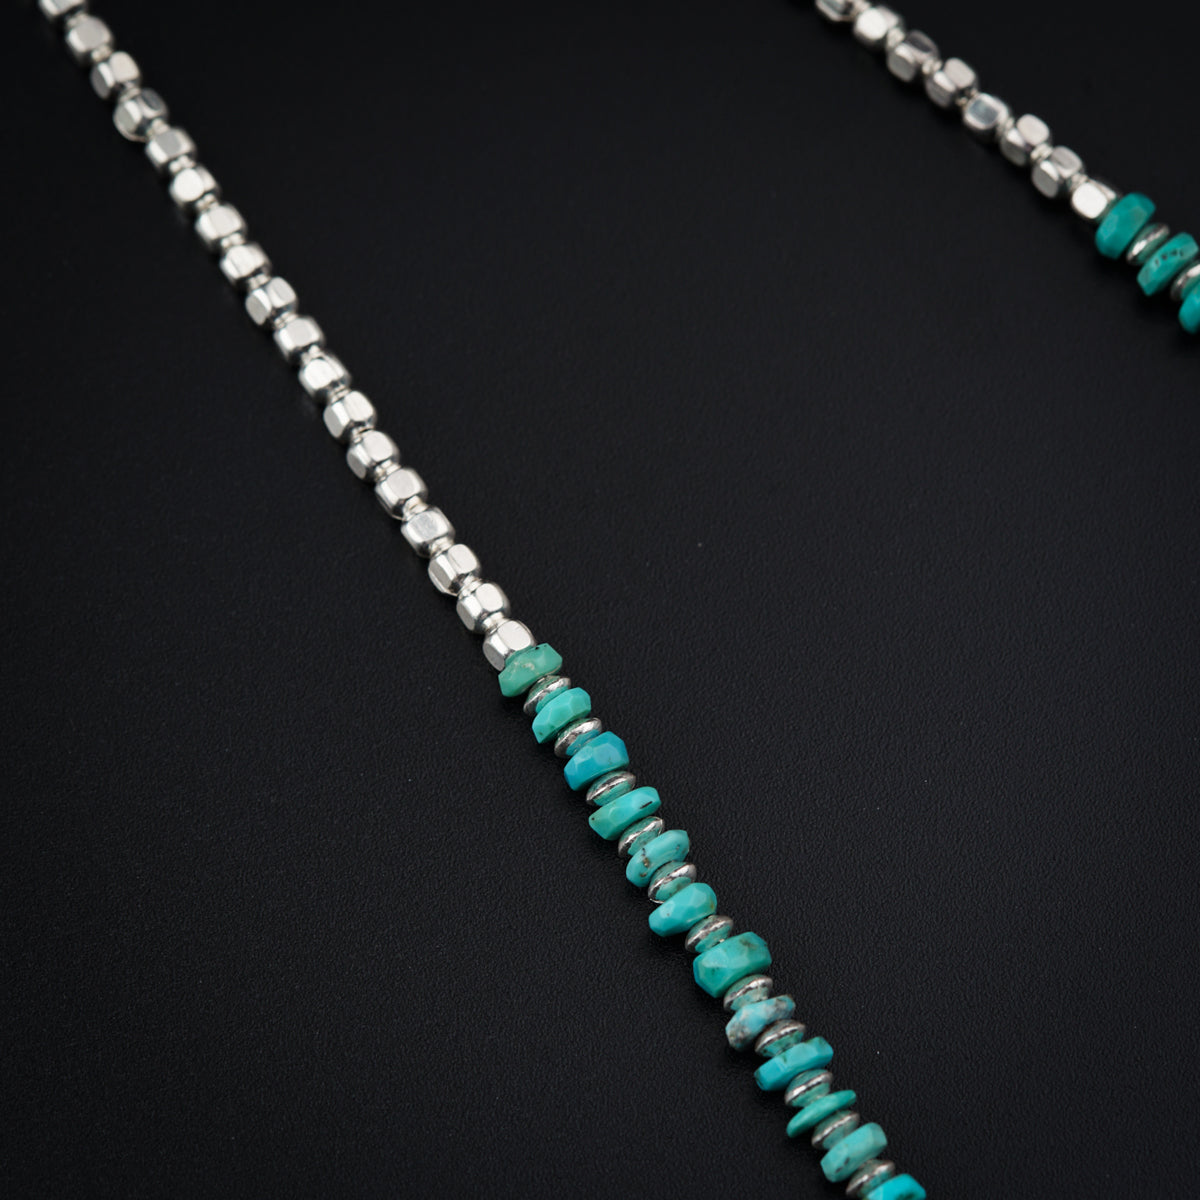 a necklace with a turquoise bead and silver beads